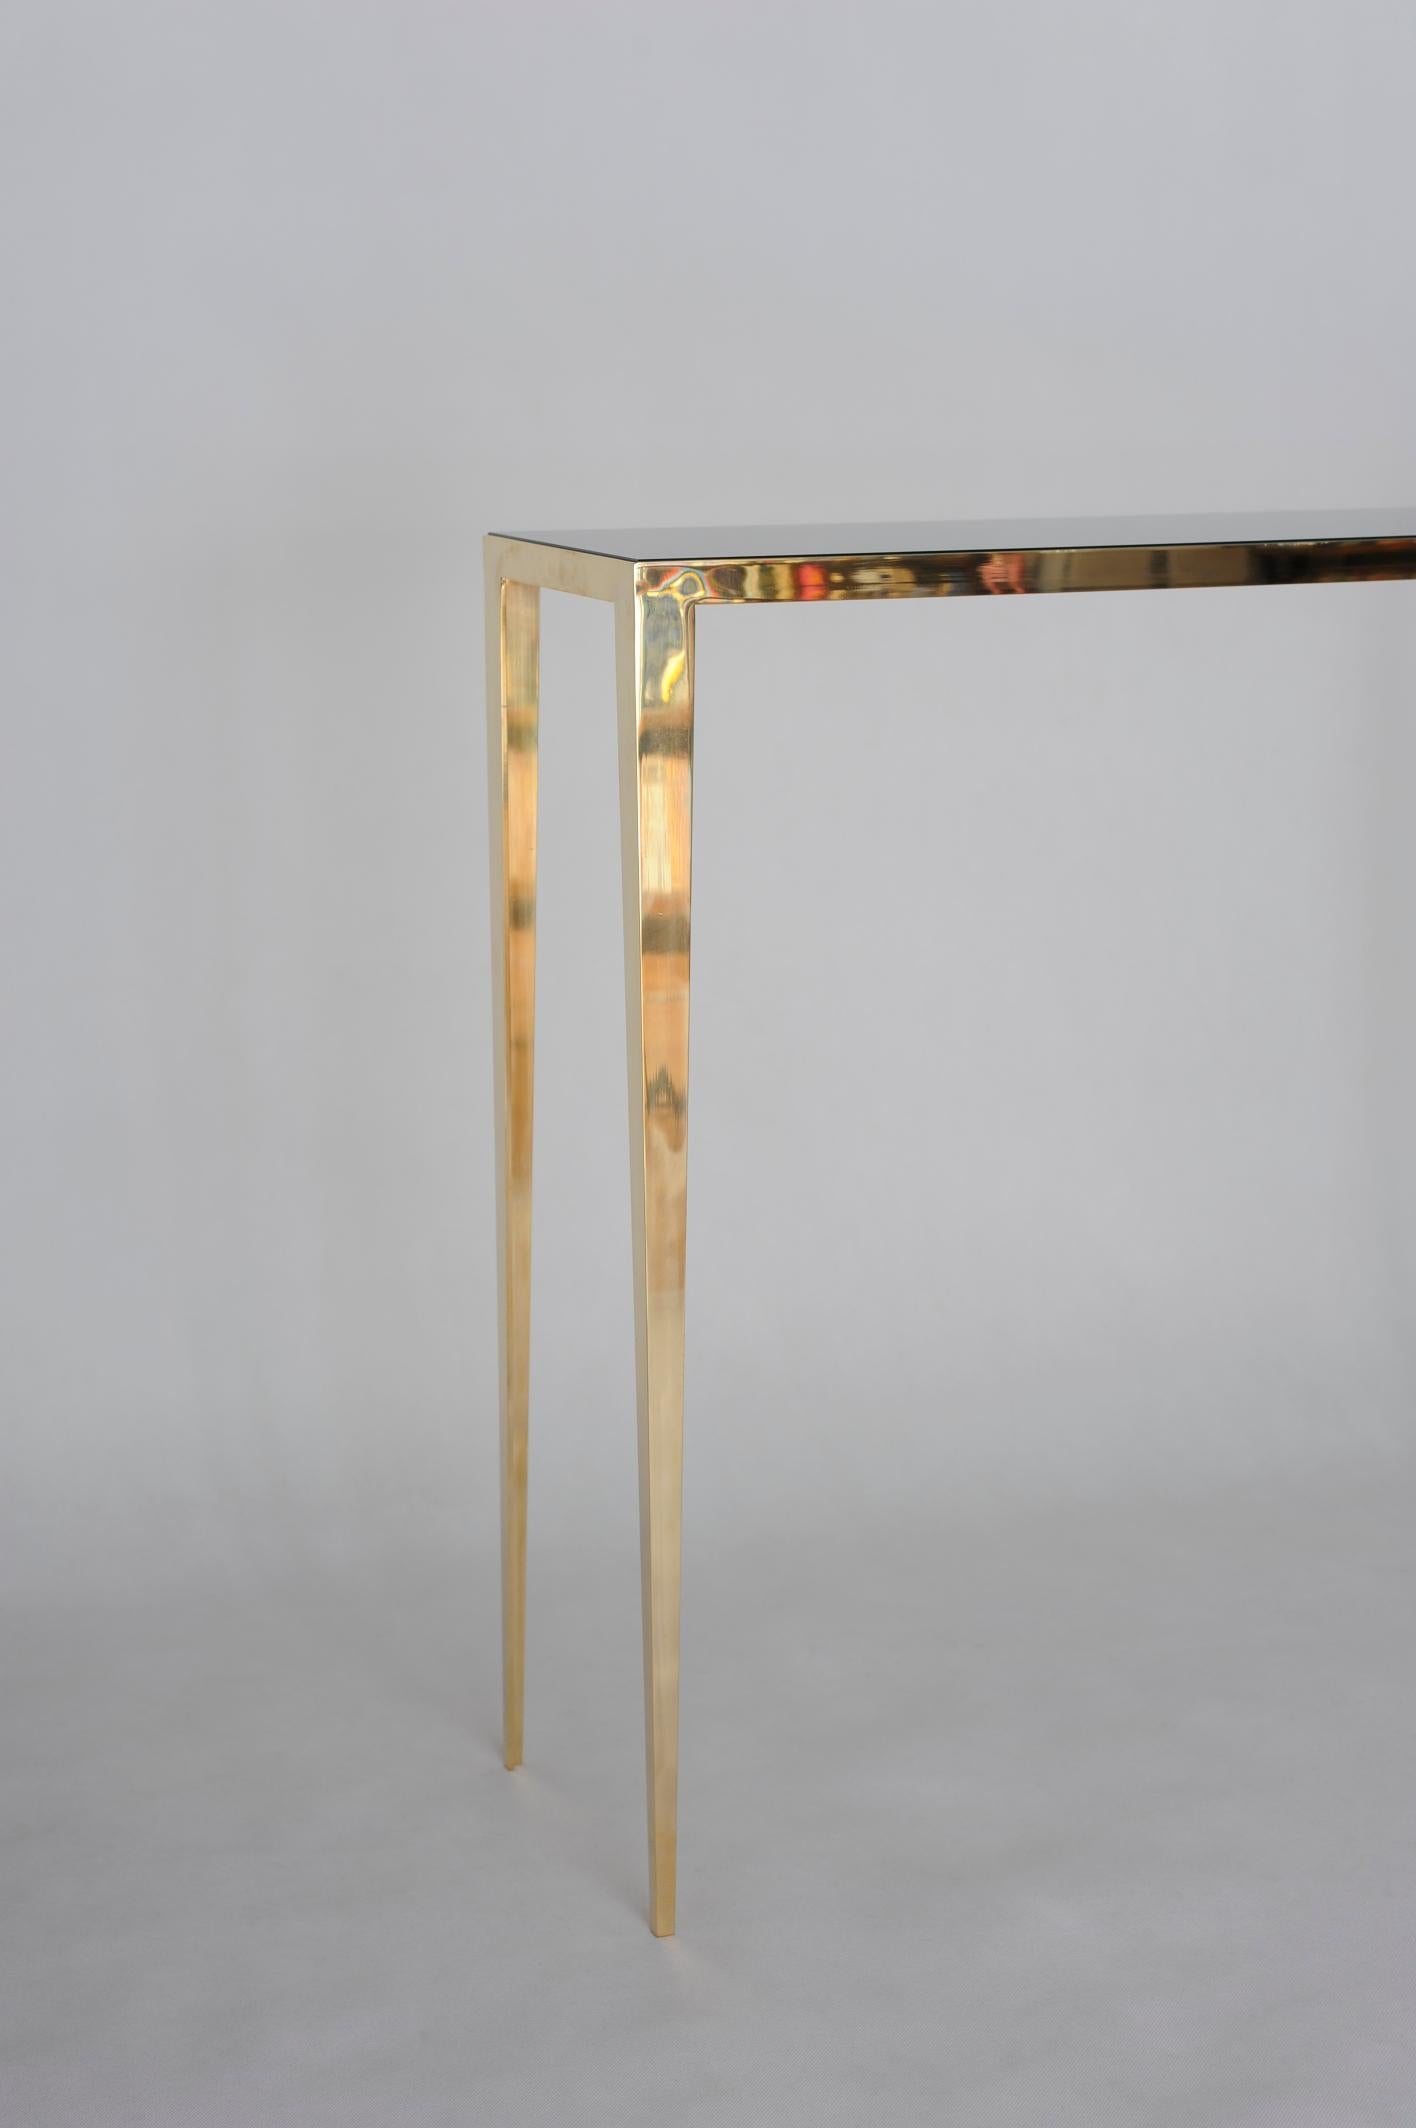 Brass refined console signed by Lukasz Friedrich
Console table, 2020
Materials: Brass, lacquered glass
Finish: Polished brass
Dimensions: D 30 cm, L 110 cm, H 79 cm
This piece can be customized
Other finishes tops and dimensions on